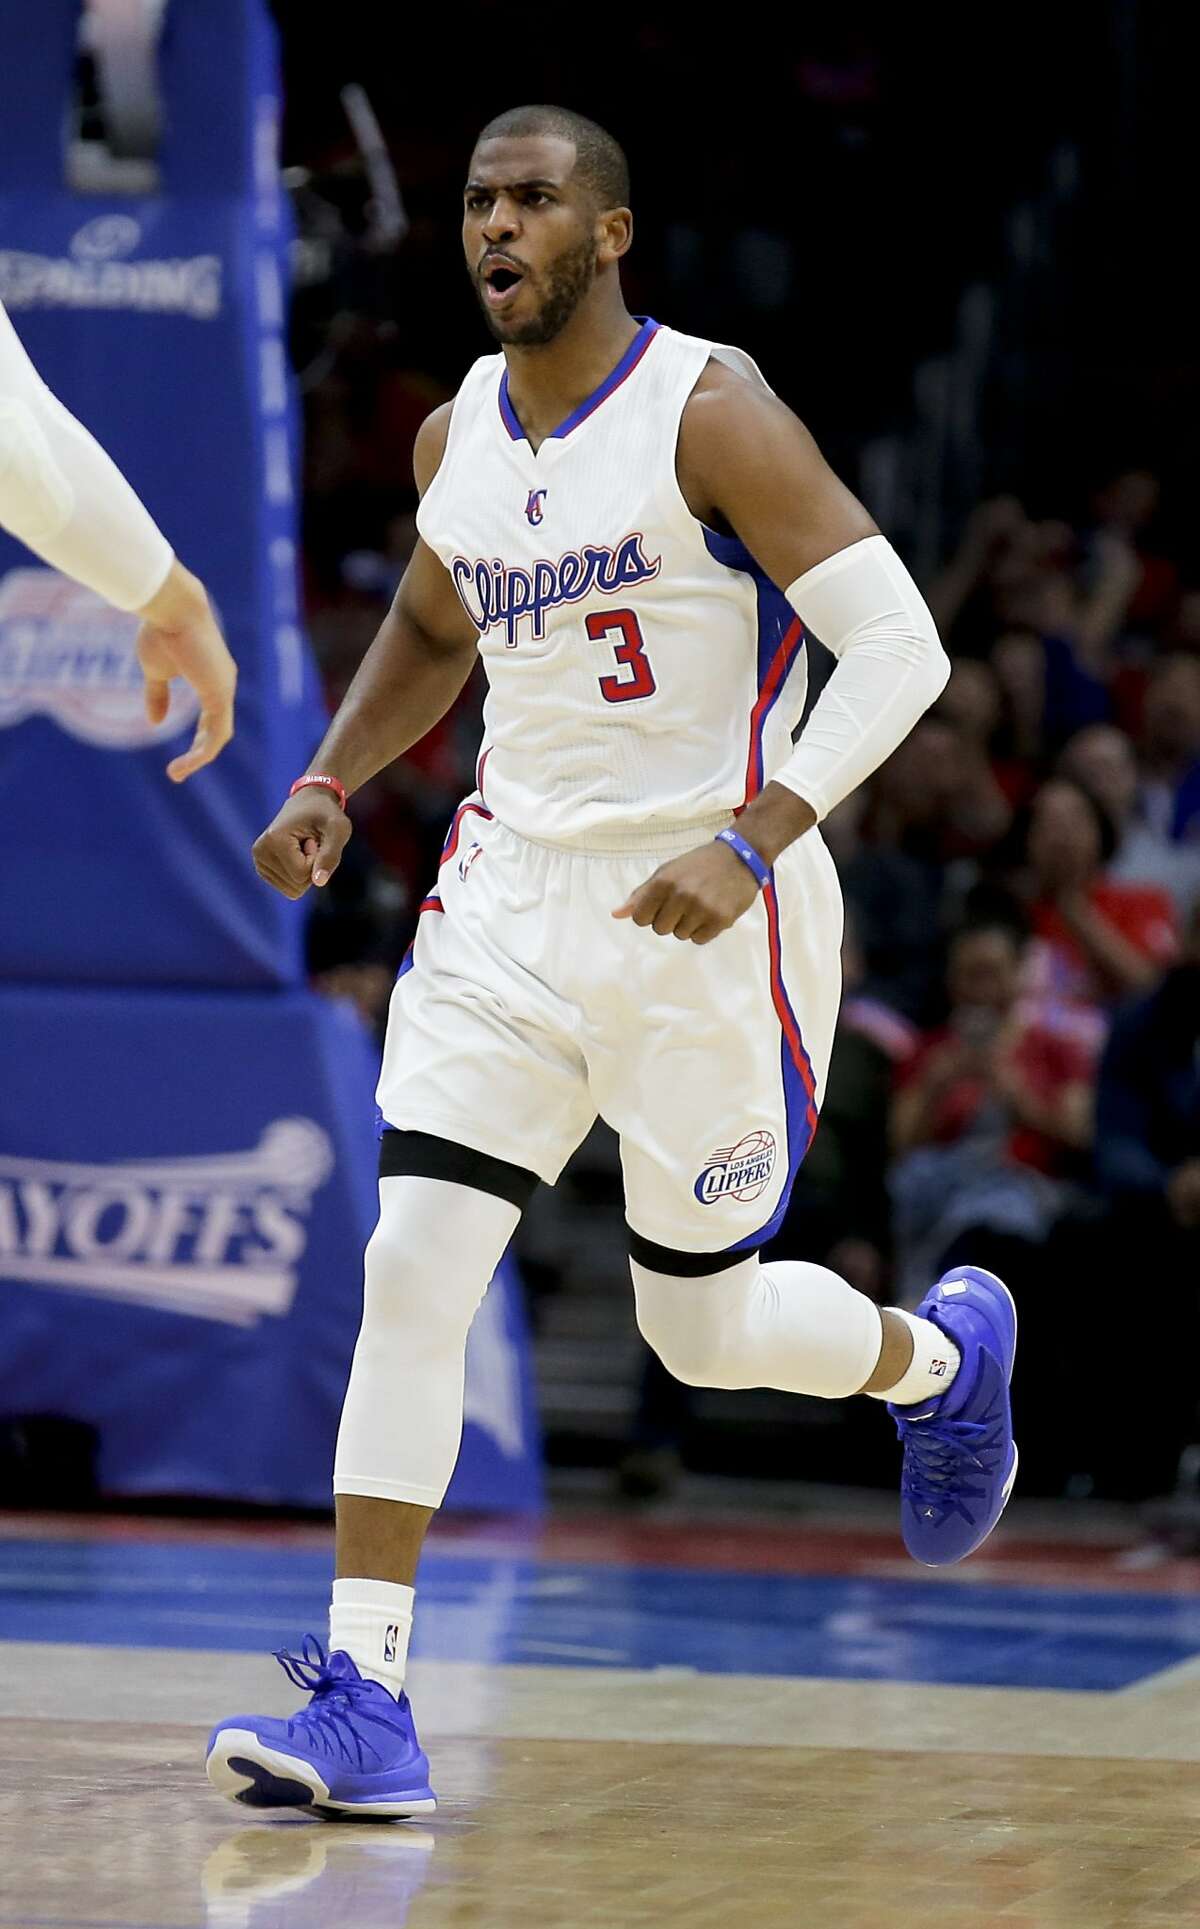 Los Angeles Clippers guard Chris Paul celebrates during Game 2 of a first-round NBA basketball playoff series against the San Antonio Spurs in Los Angeles, Thursday, April 23, 2015. The Spurs won 111-107 in overtime. (AP Photo/Chris Carlson)